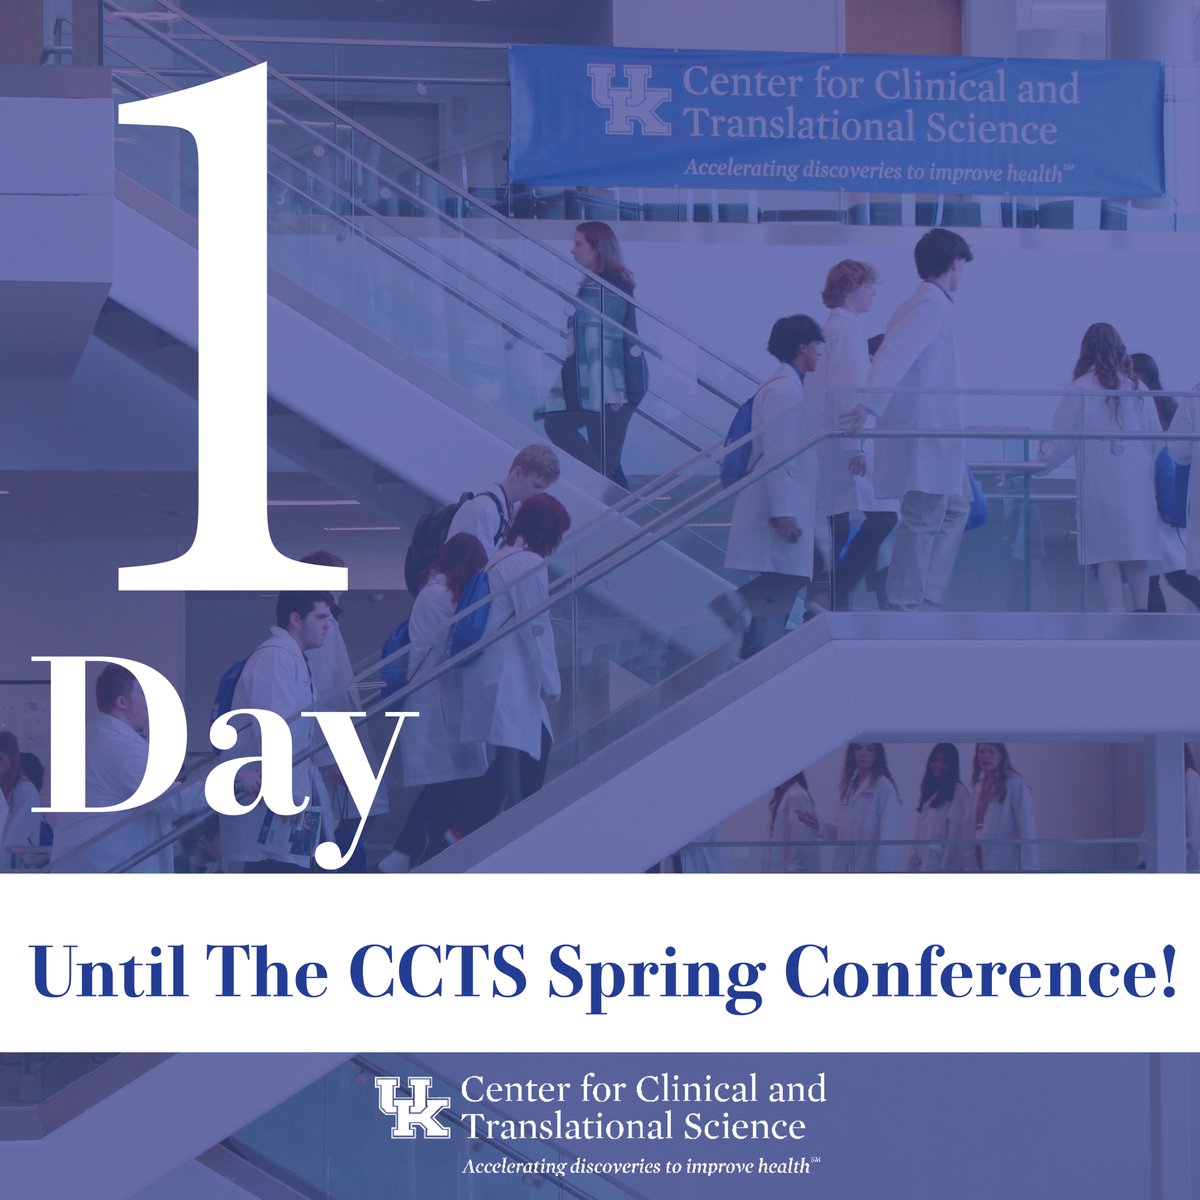 Only 1 DAY LEFT for the 2024 CCTS Spring Conference! Hundreds of investigators, research staff, trainees, students, and community partners, attend. It's an opportunity for us to share findings, build collaborations, and provide mentorship. Learn more: ccts.uky.edu/conference2024